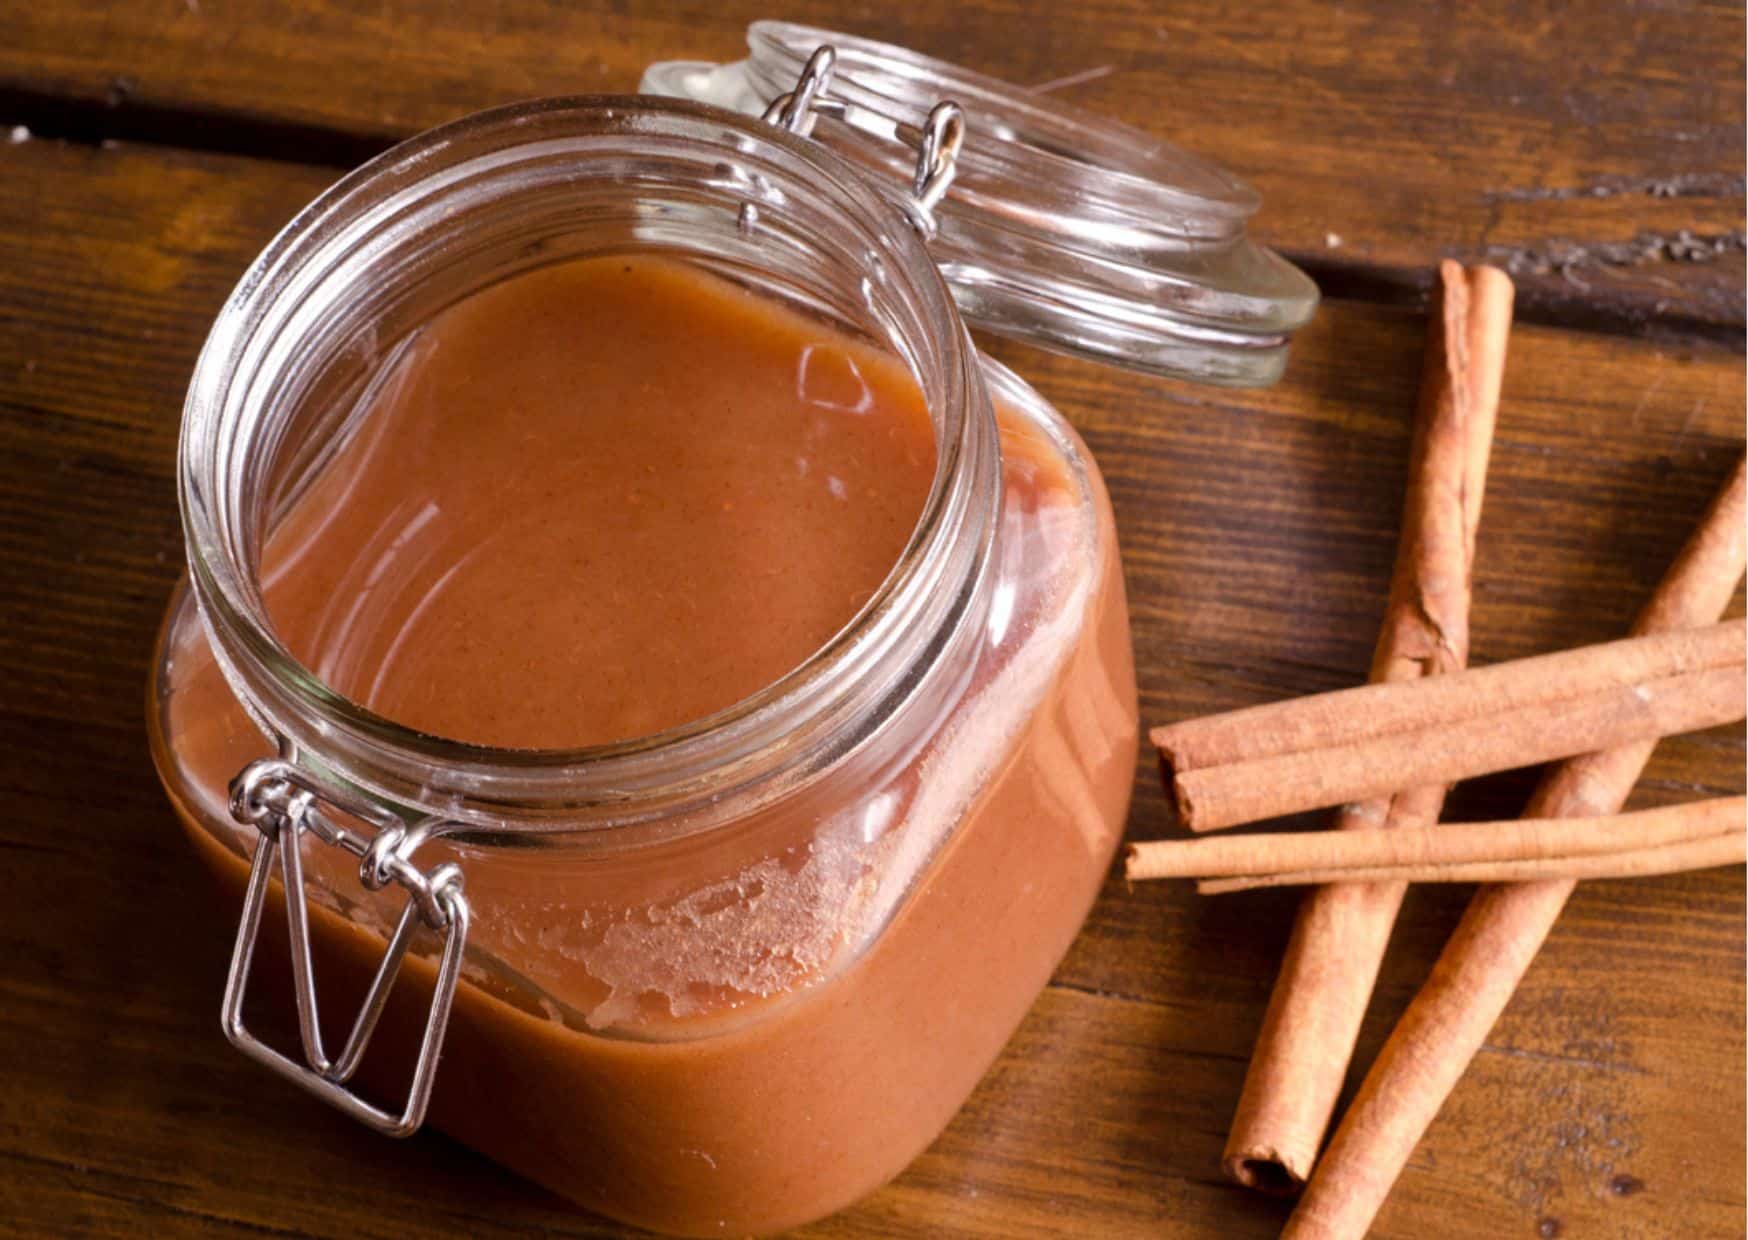 Slow-Cooked Paleo Apple Butter in a glass jar next to cinnamon sticks on a table.